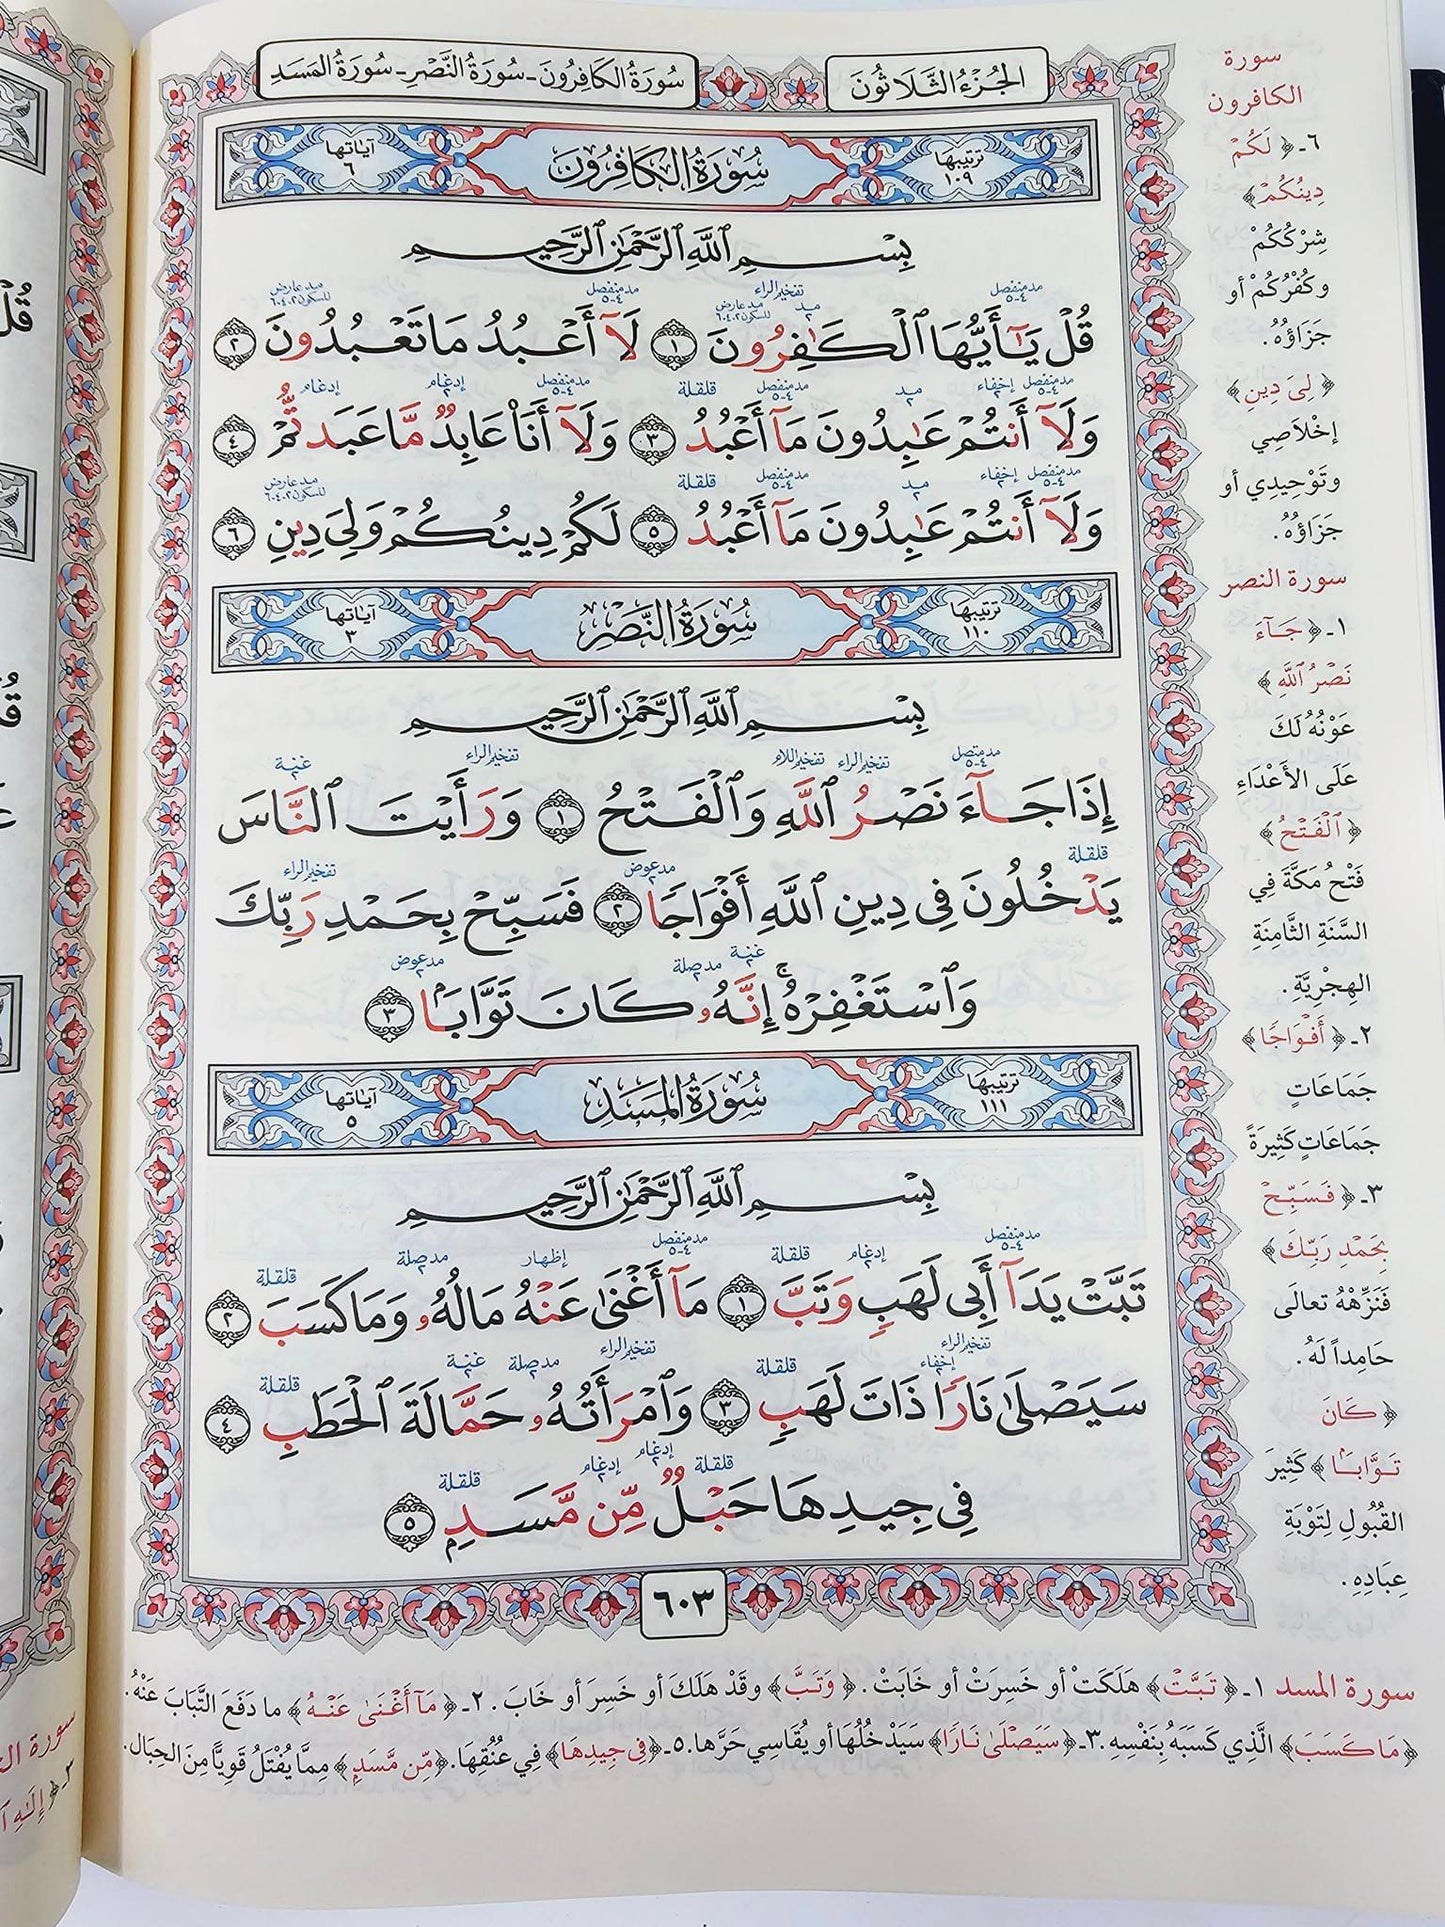 X Large Hardcover Quran with Color Deep Coded Tajweed Rules